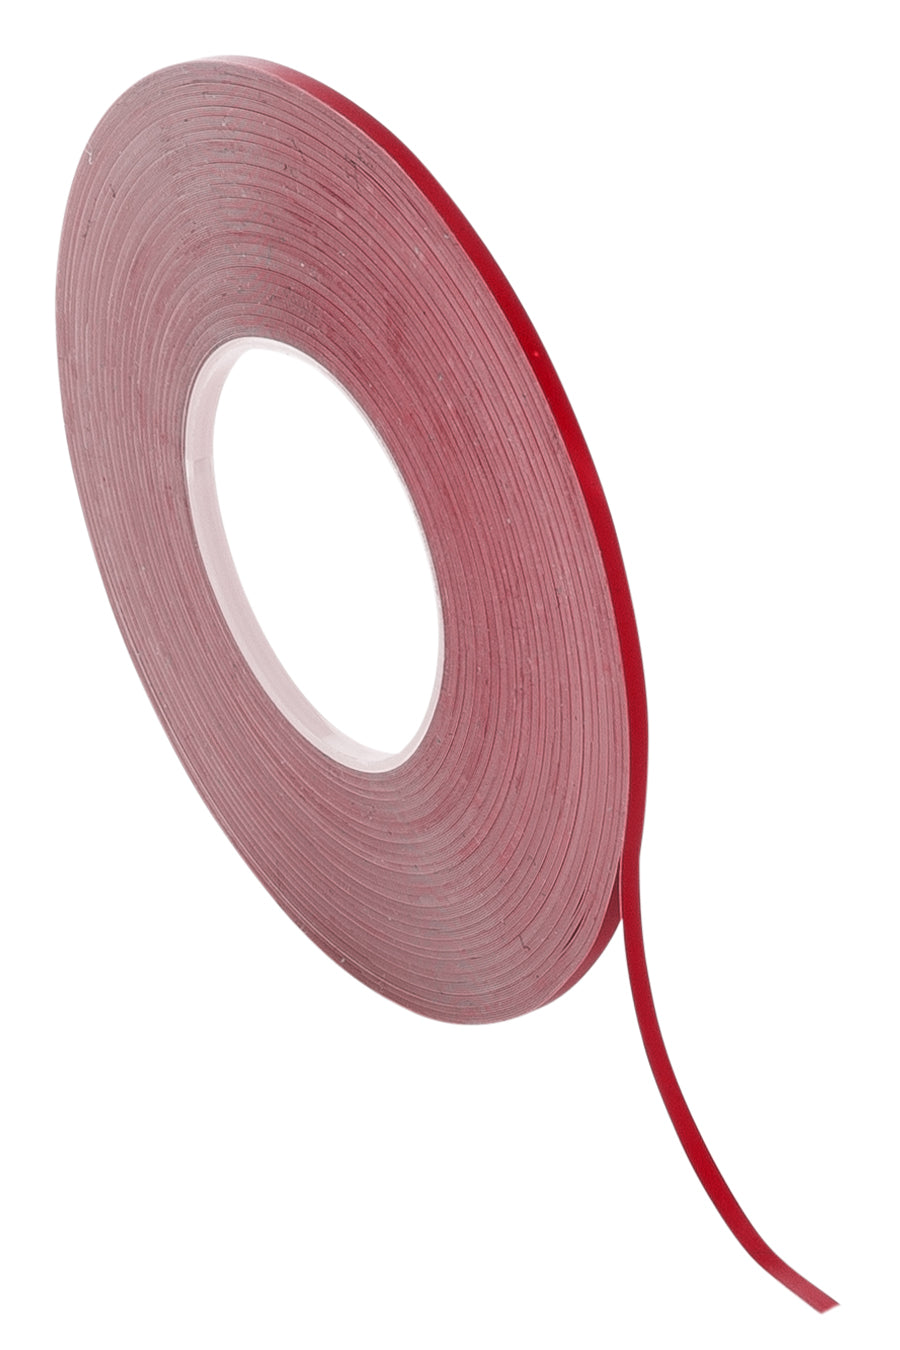 1/16" x 648" Red Glossy Tape